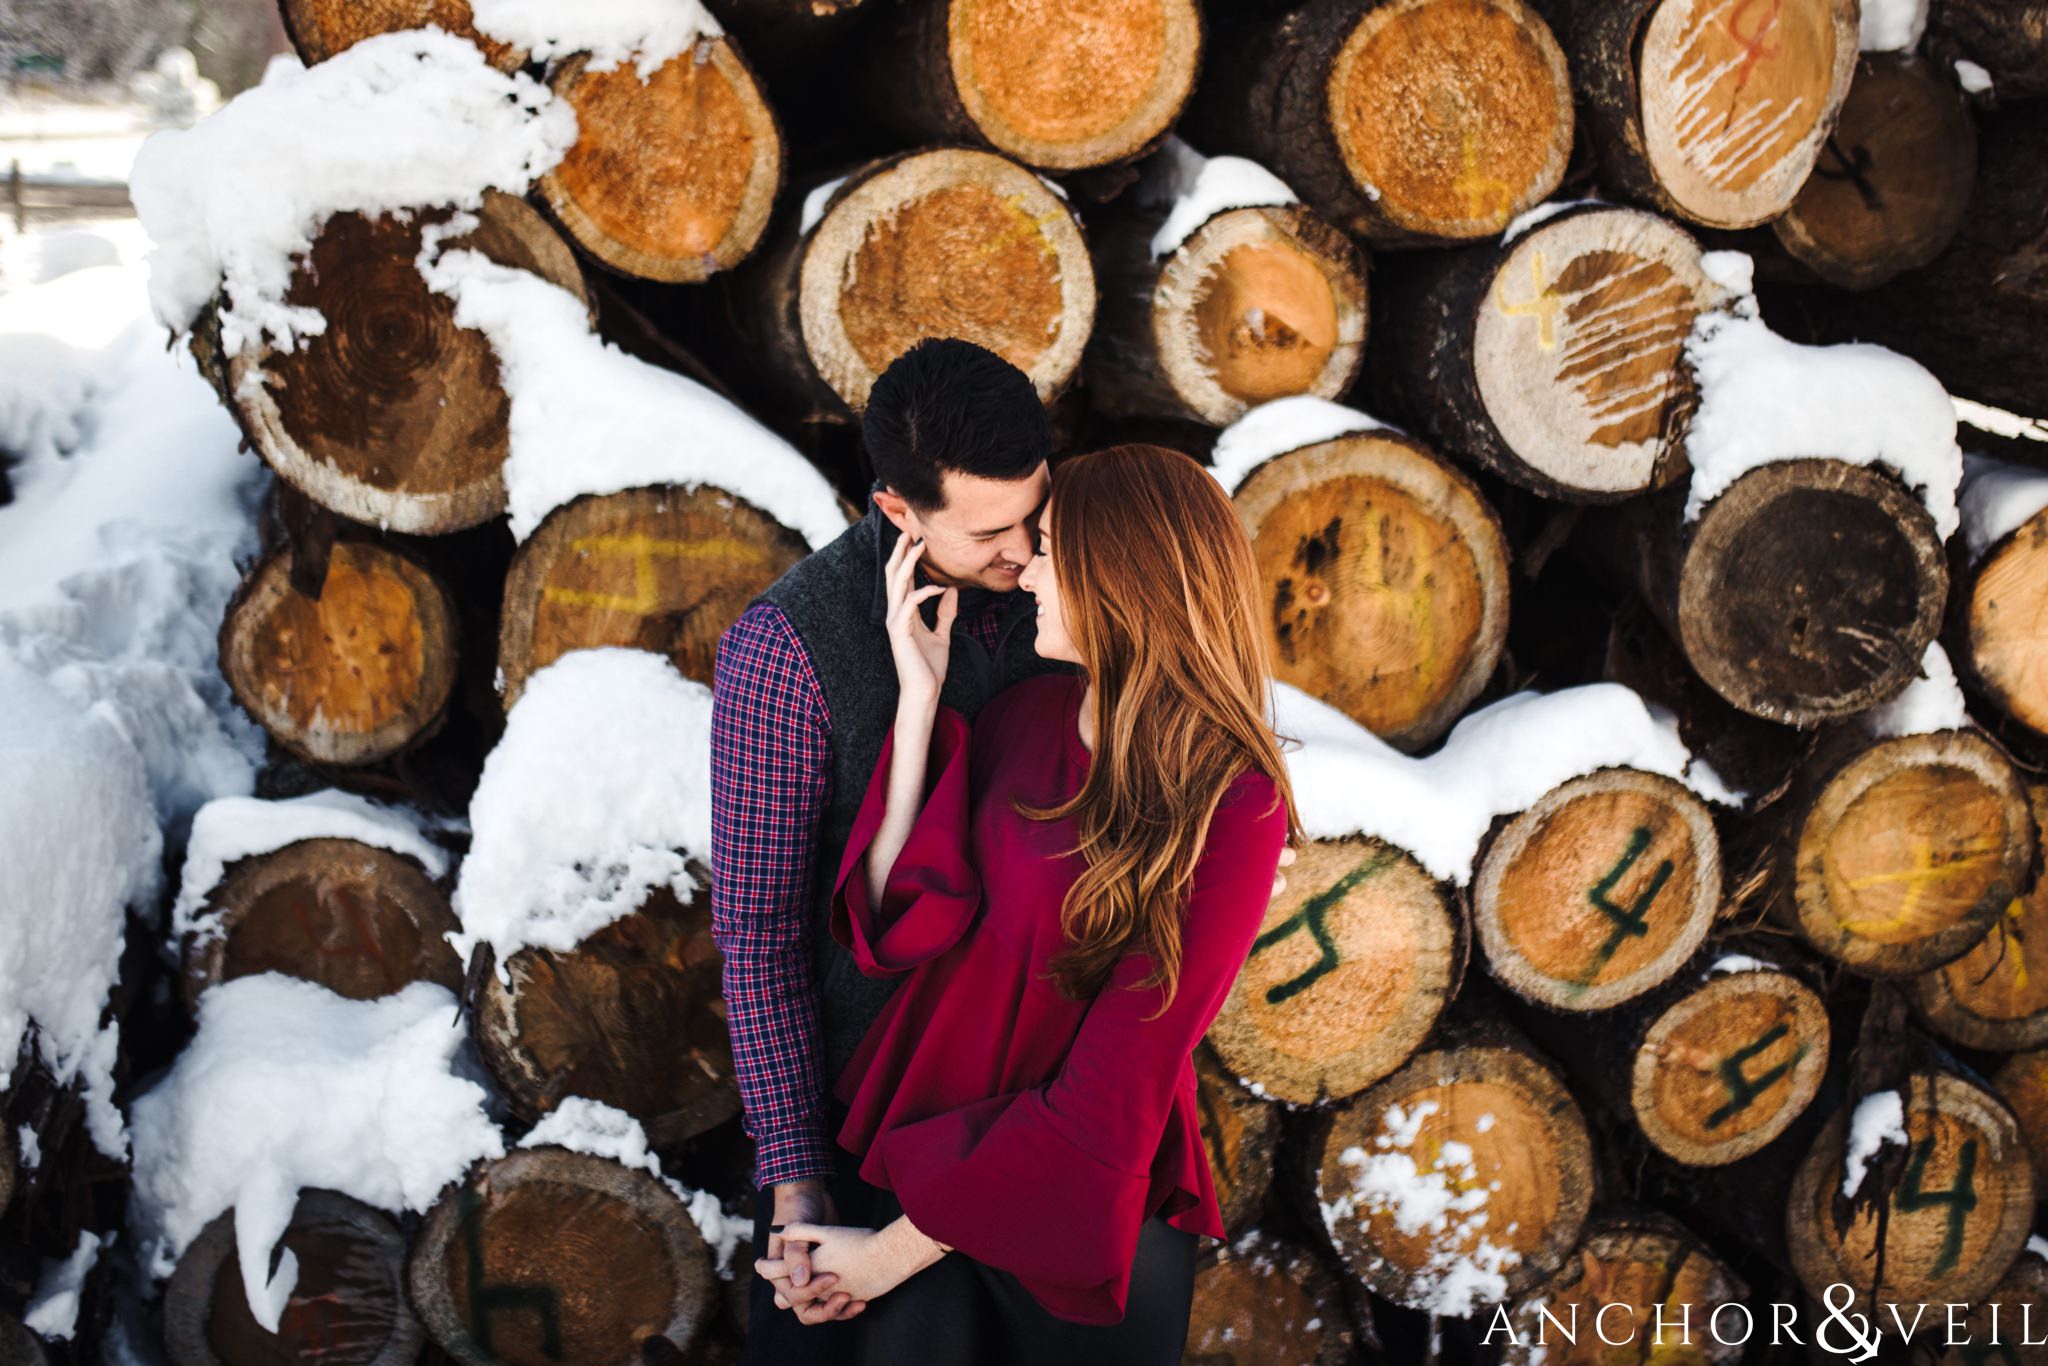 bringing him close next to the logs during their Snowy Asheville Engagement Session